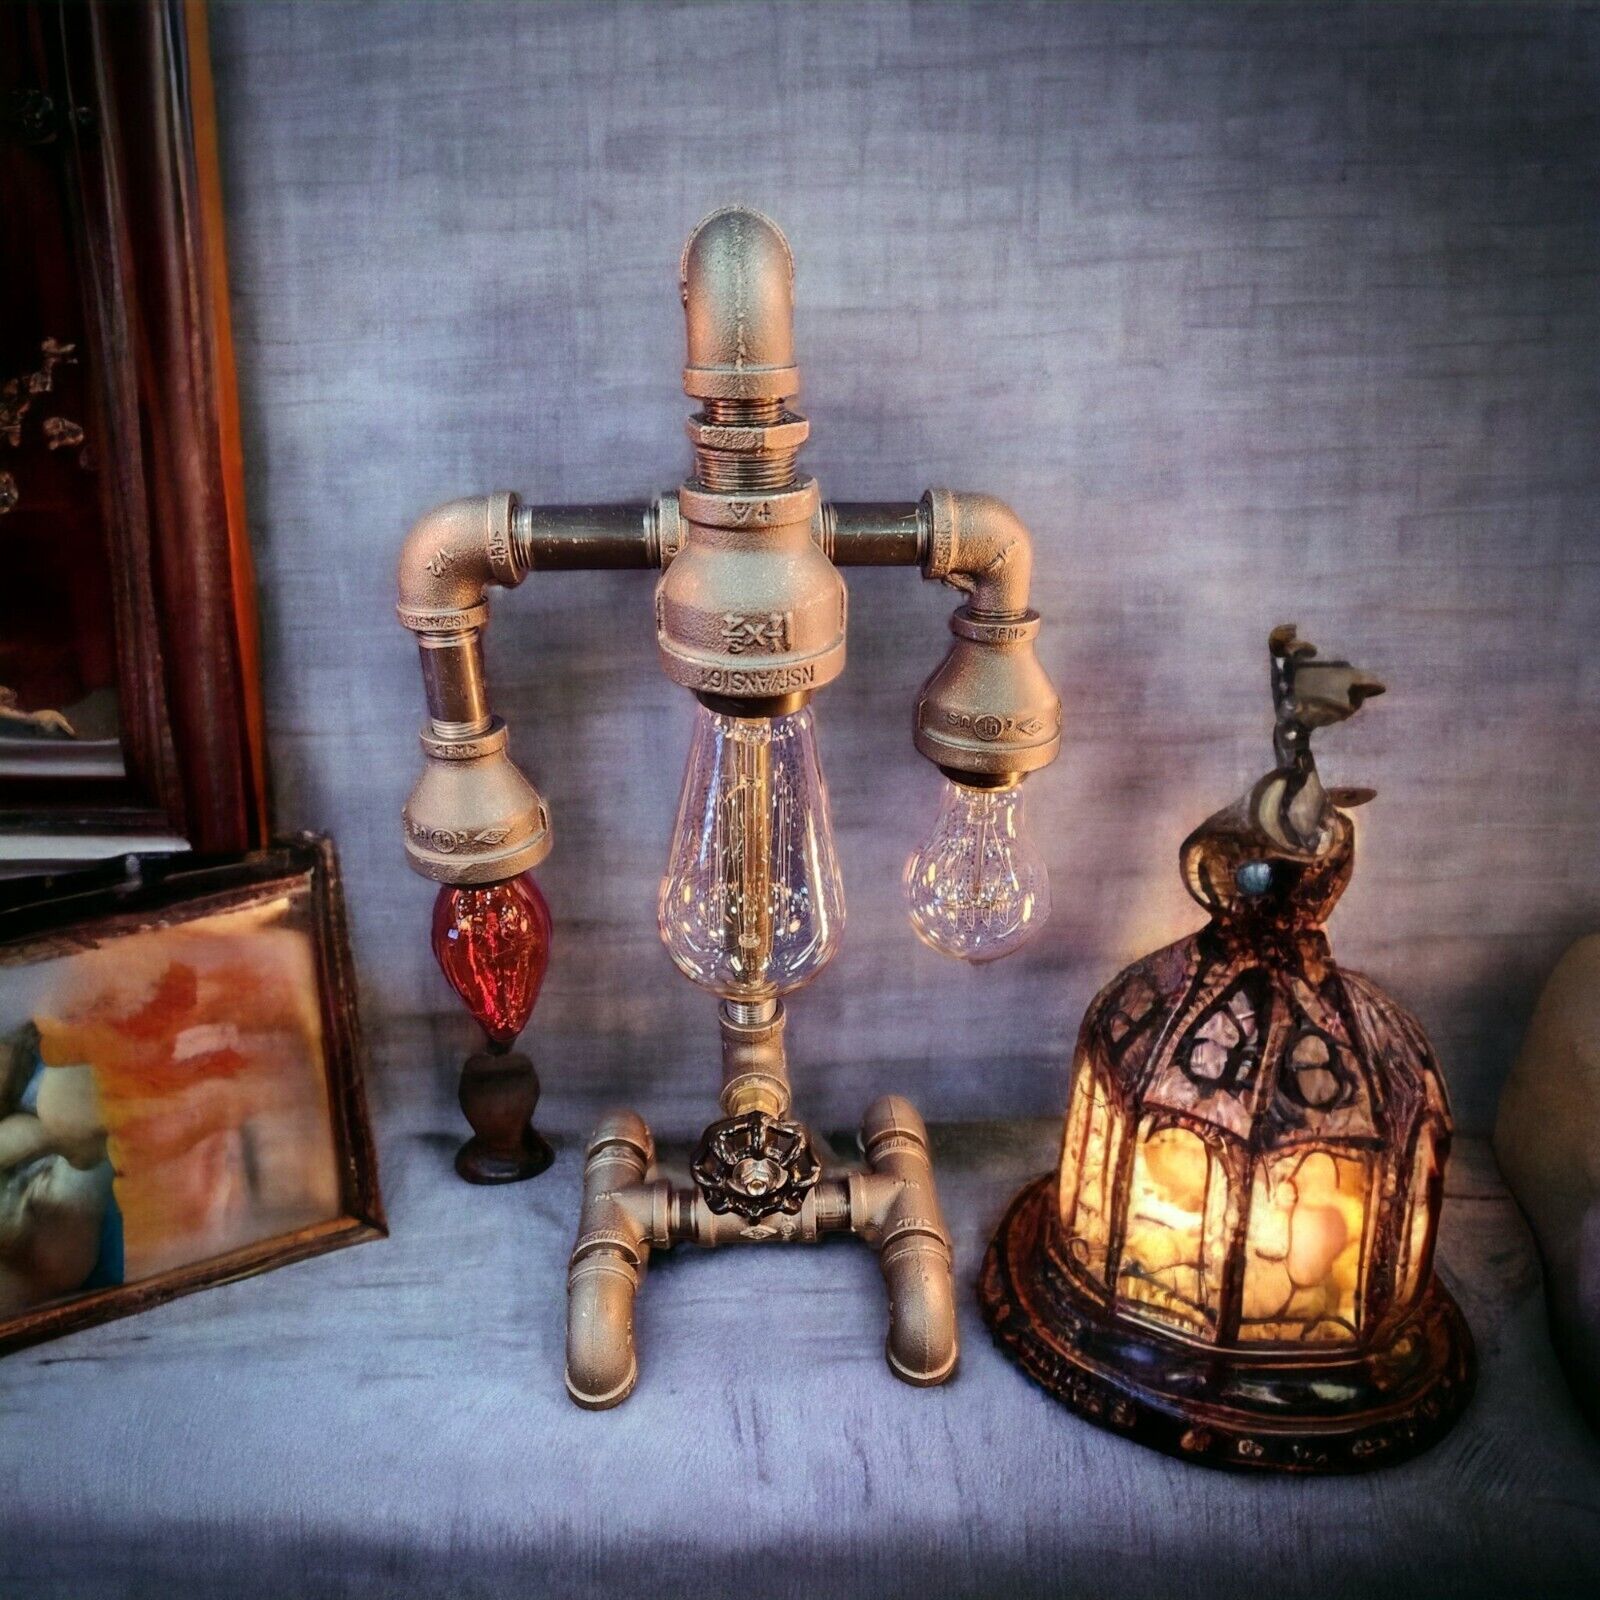 Industrial Pipe Three Bulb Lamp steampunk style with on/off valve switch